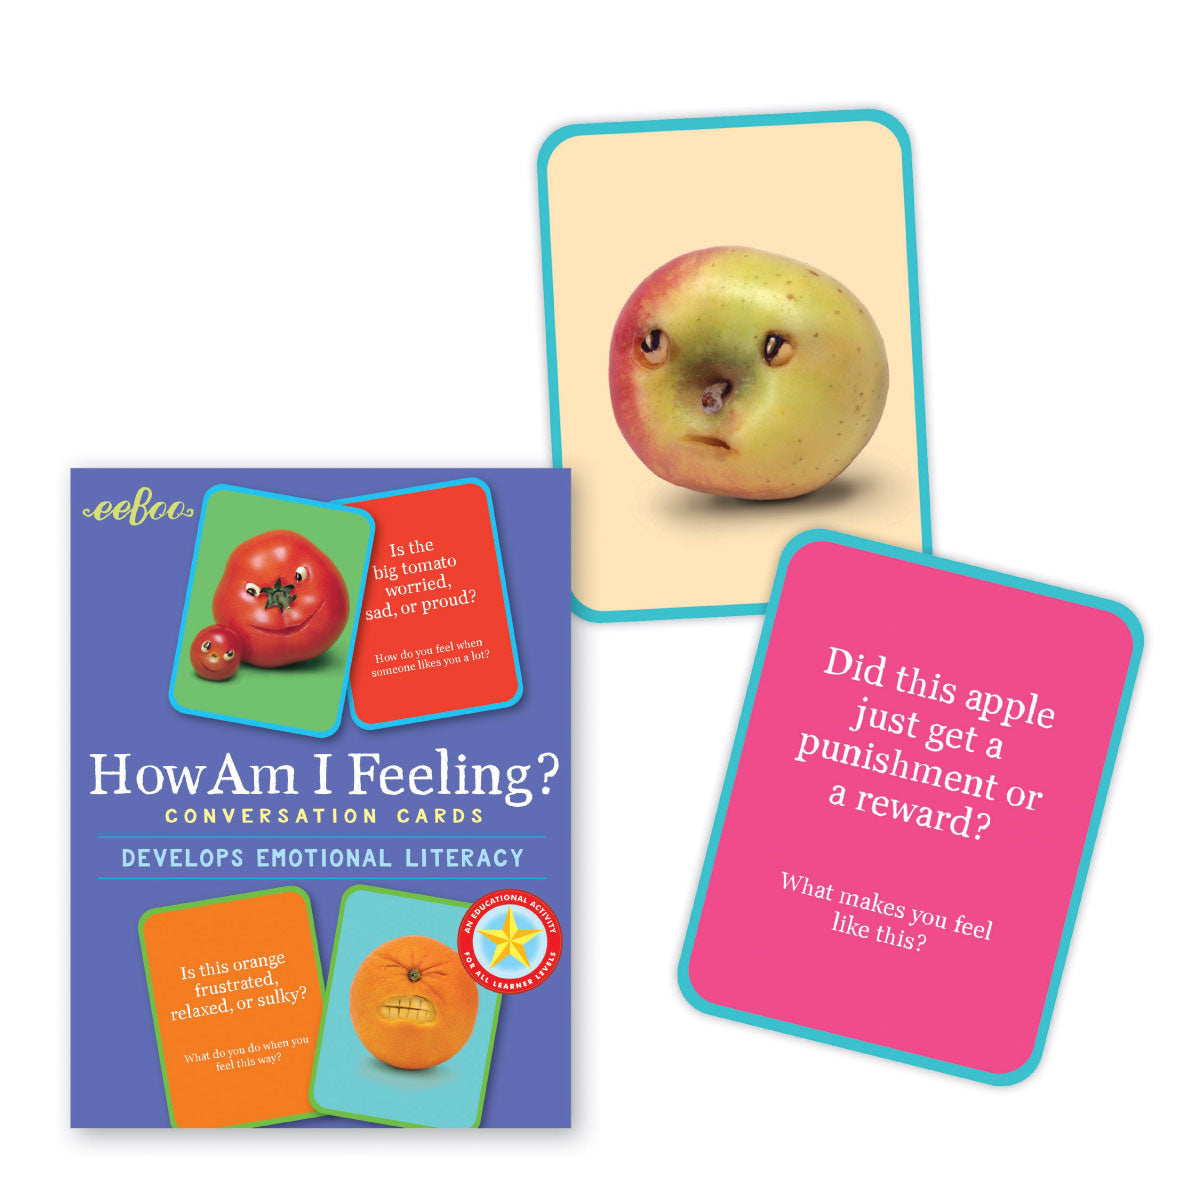 How Am I Feeling? Conversation Cards from eeBoo